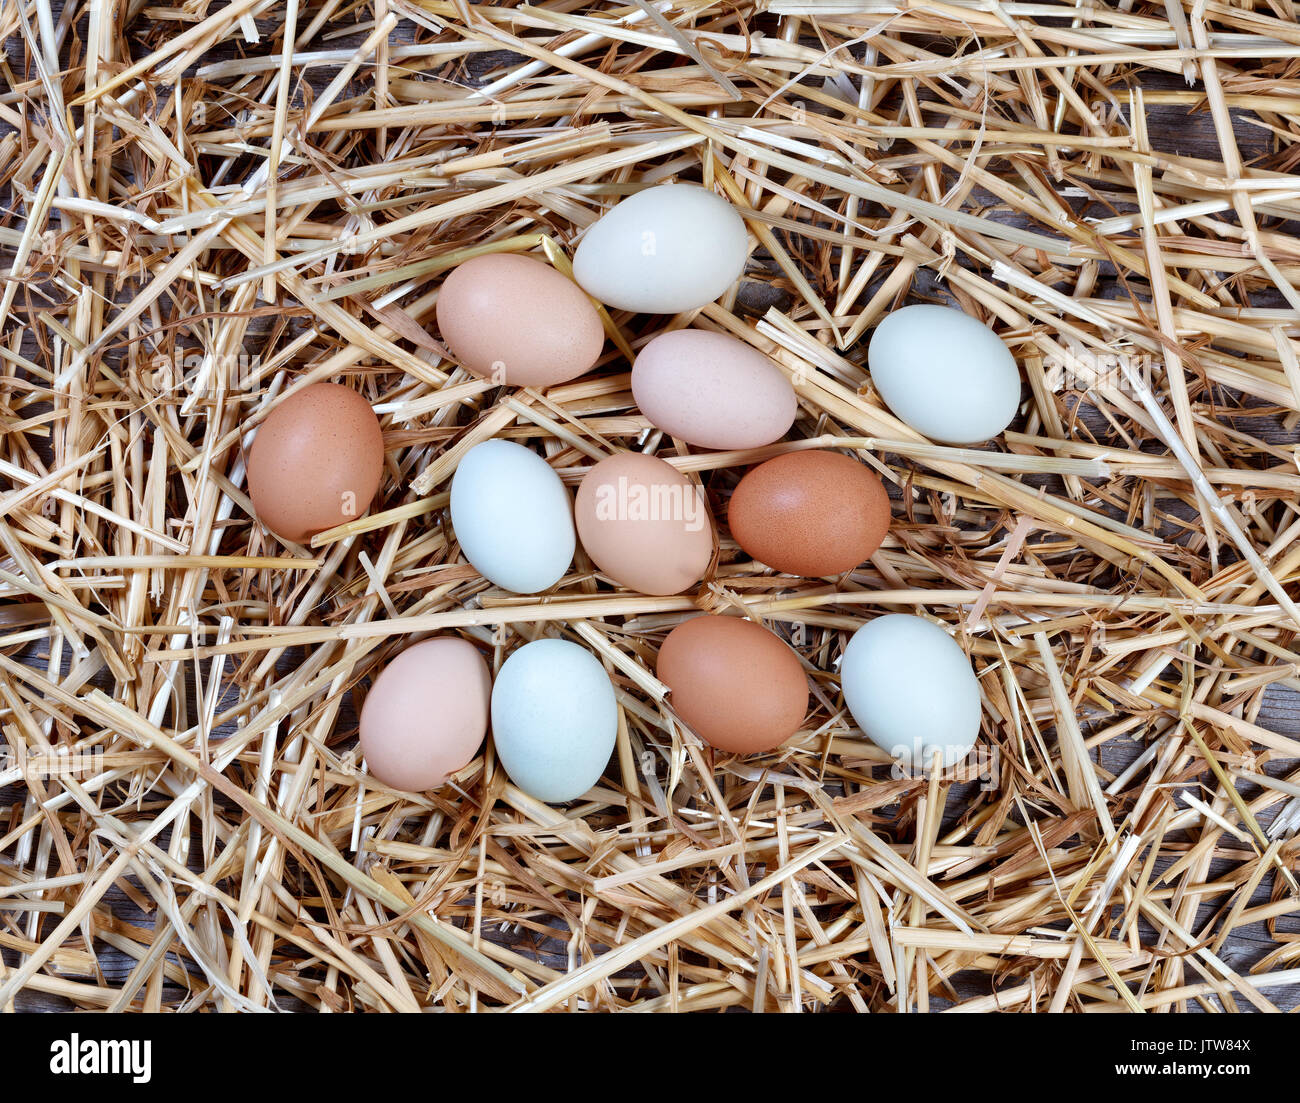 Organic raw eggs in different natural colors on straw and wood for Easter holiday background Stock Photo